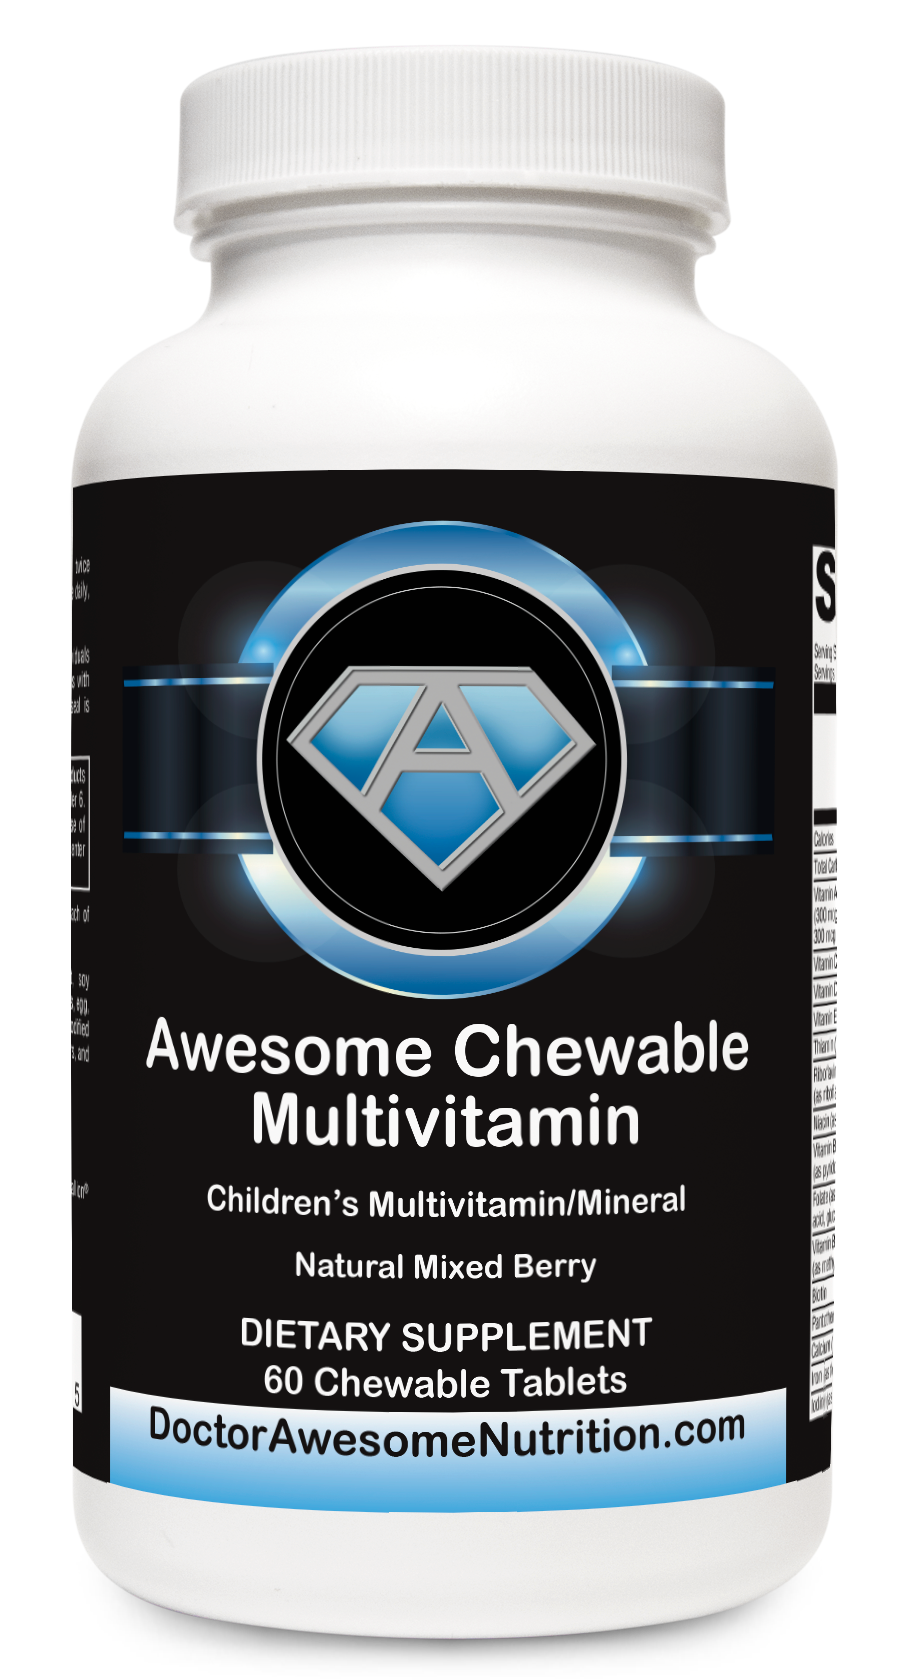 Awesome Chewable Multivitamin